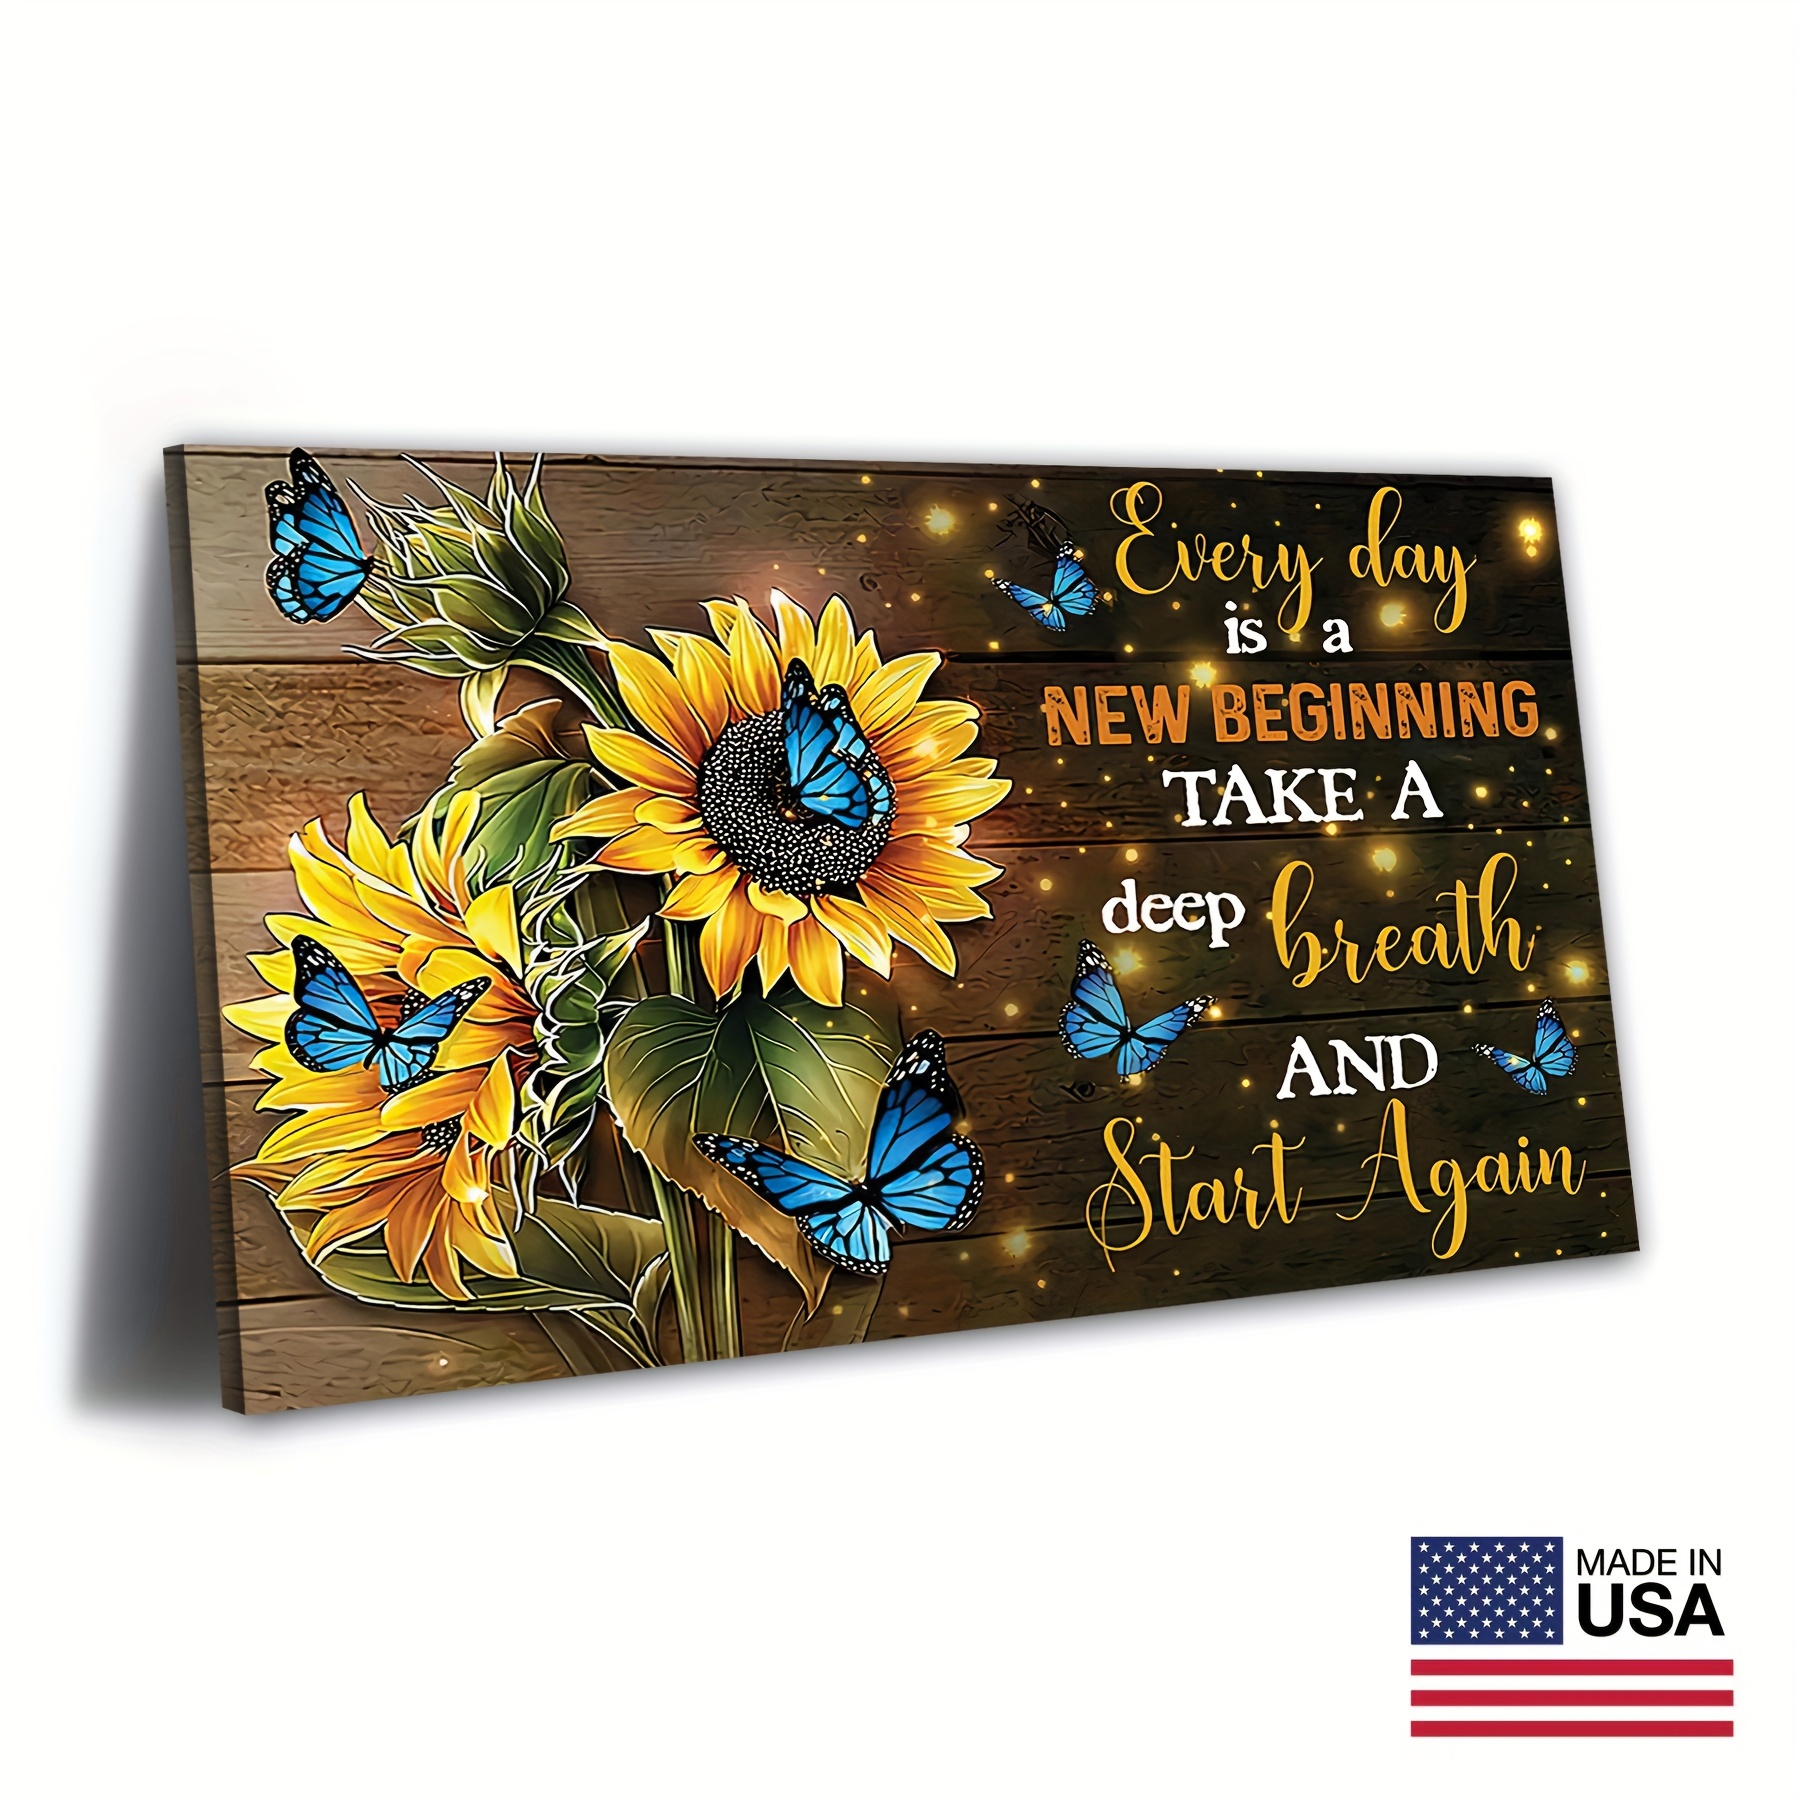 

1pc Wooden Framed Sunflower Motivational Wall Art Yellow Floral And Blue Butterfly Print Picture Rustic Inspirational Quotes Painting Artwork For Bathroom Living Room Bedroom Home Decor, Canvas Frame